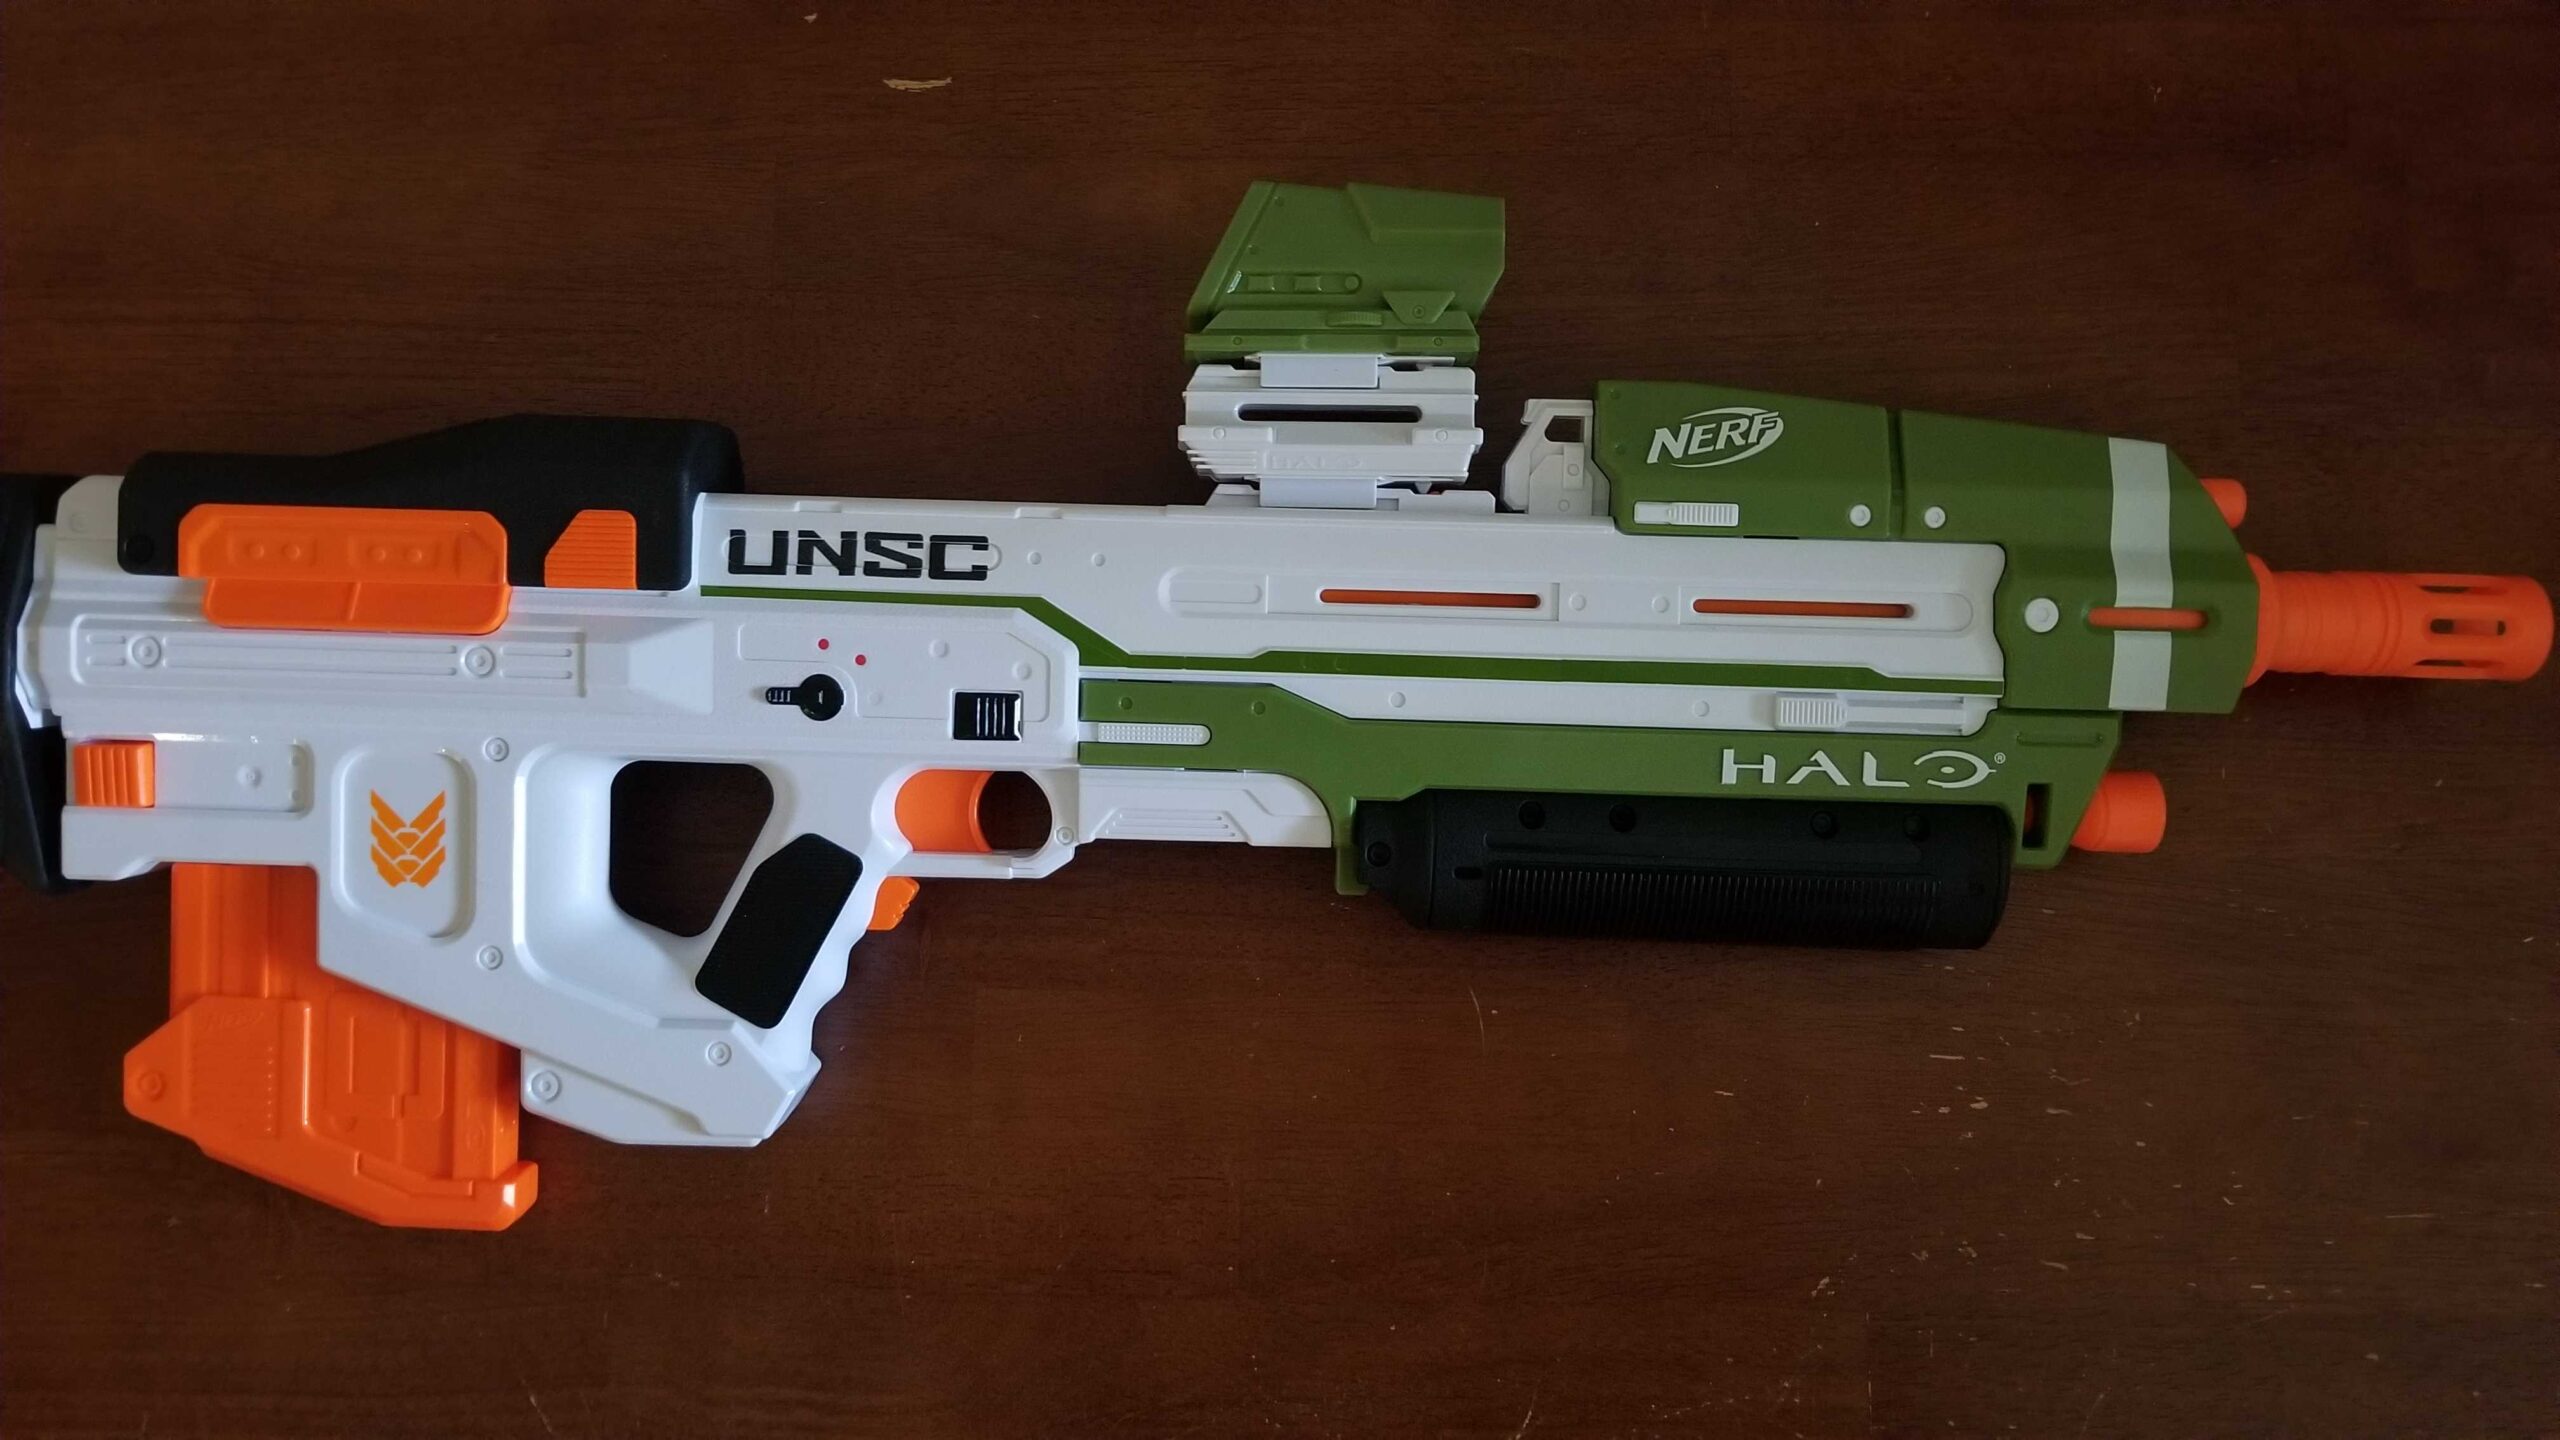 The Halo Infinite MA40 Nerf Blaster in real life